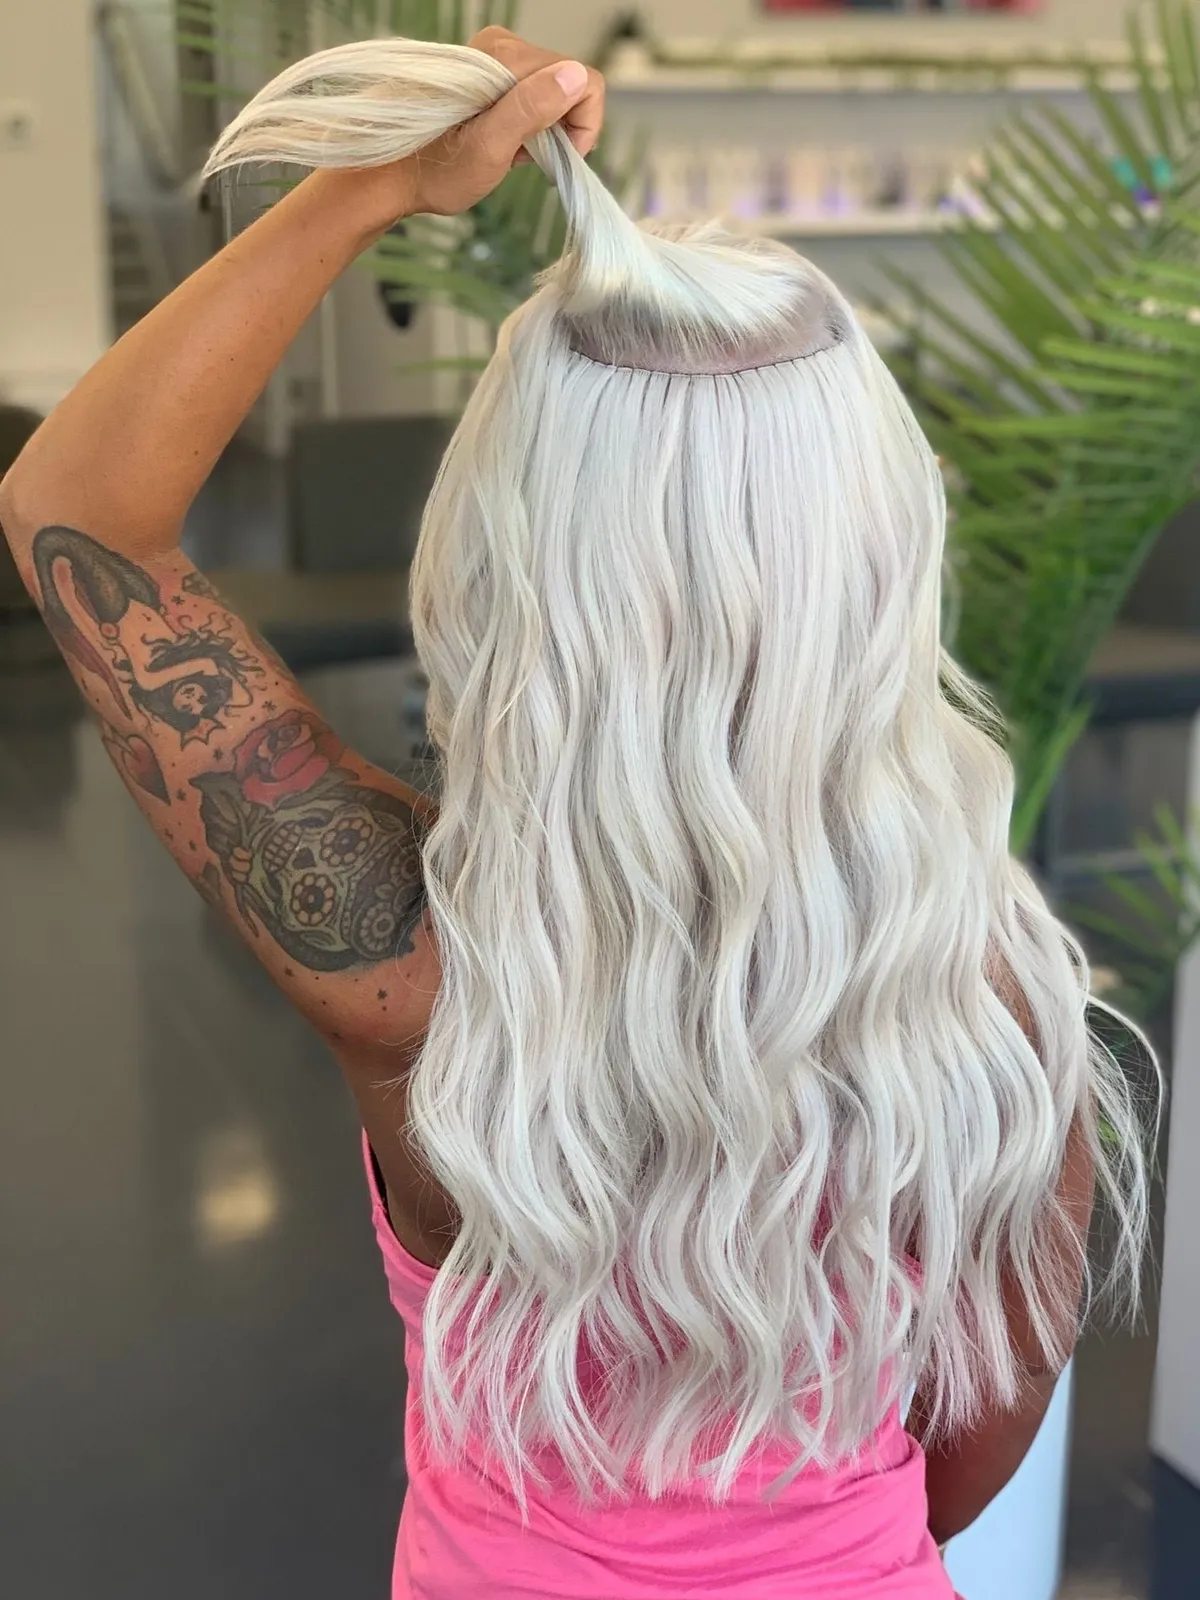 Hand Tied extensions on the long blonde hair - Louisville, KY